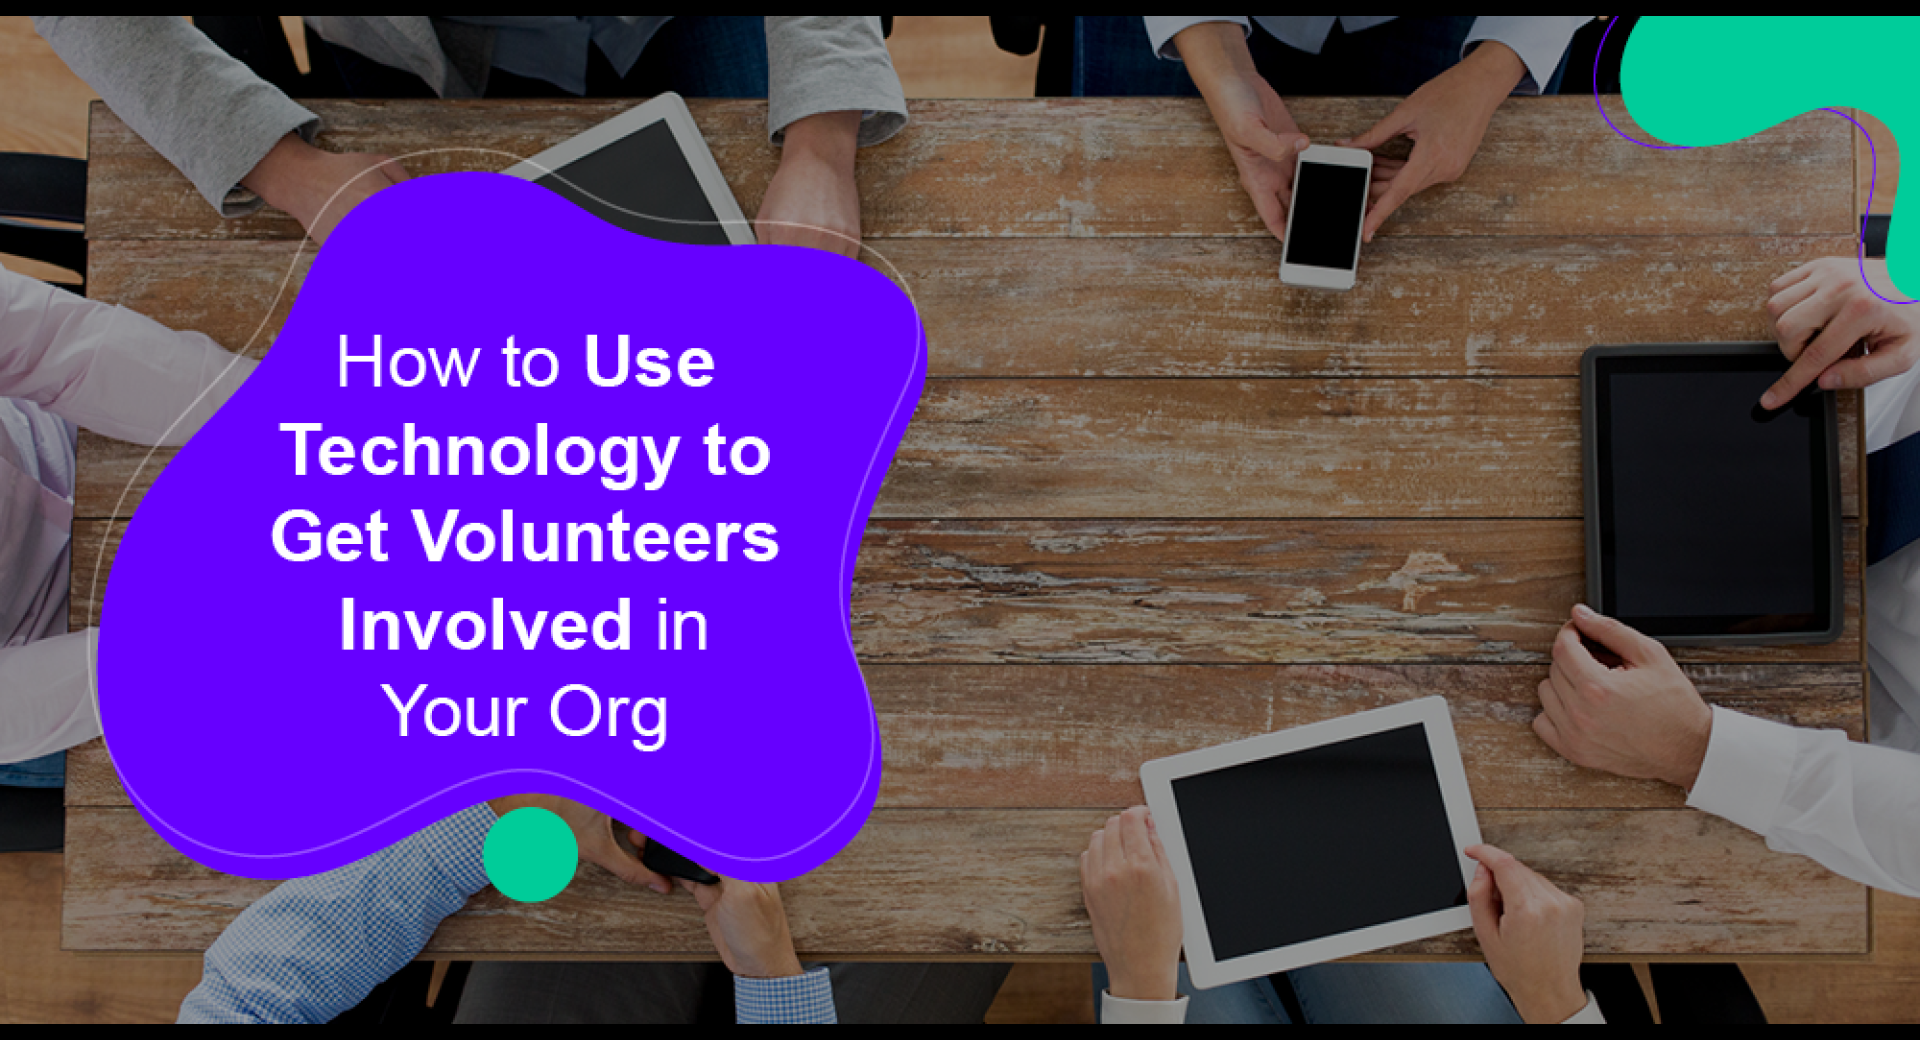 How to Use Technology to Get Volunteers Involved in Your Org